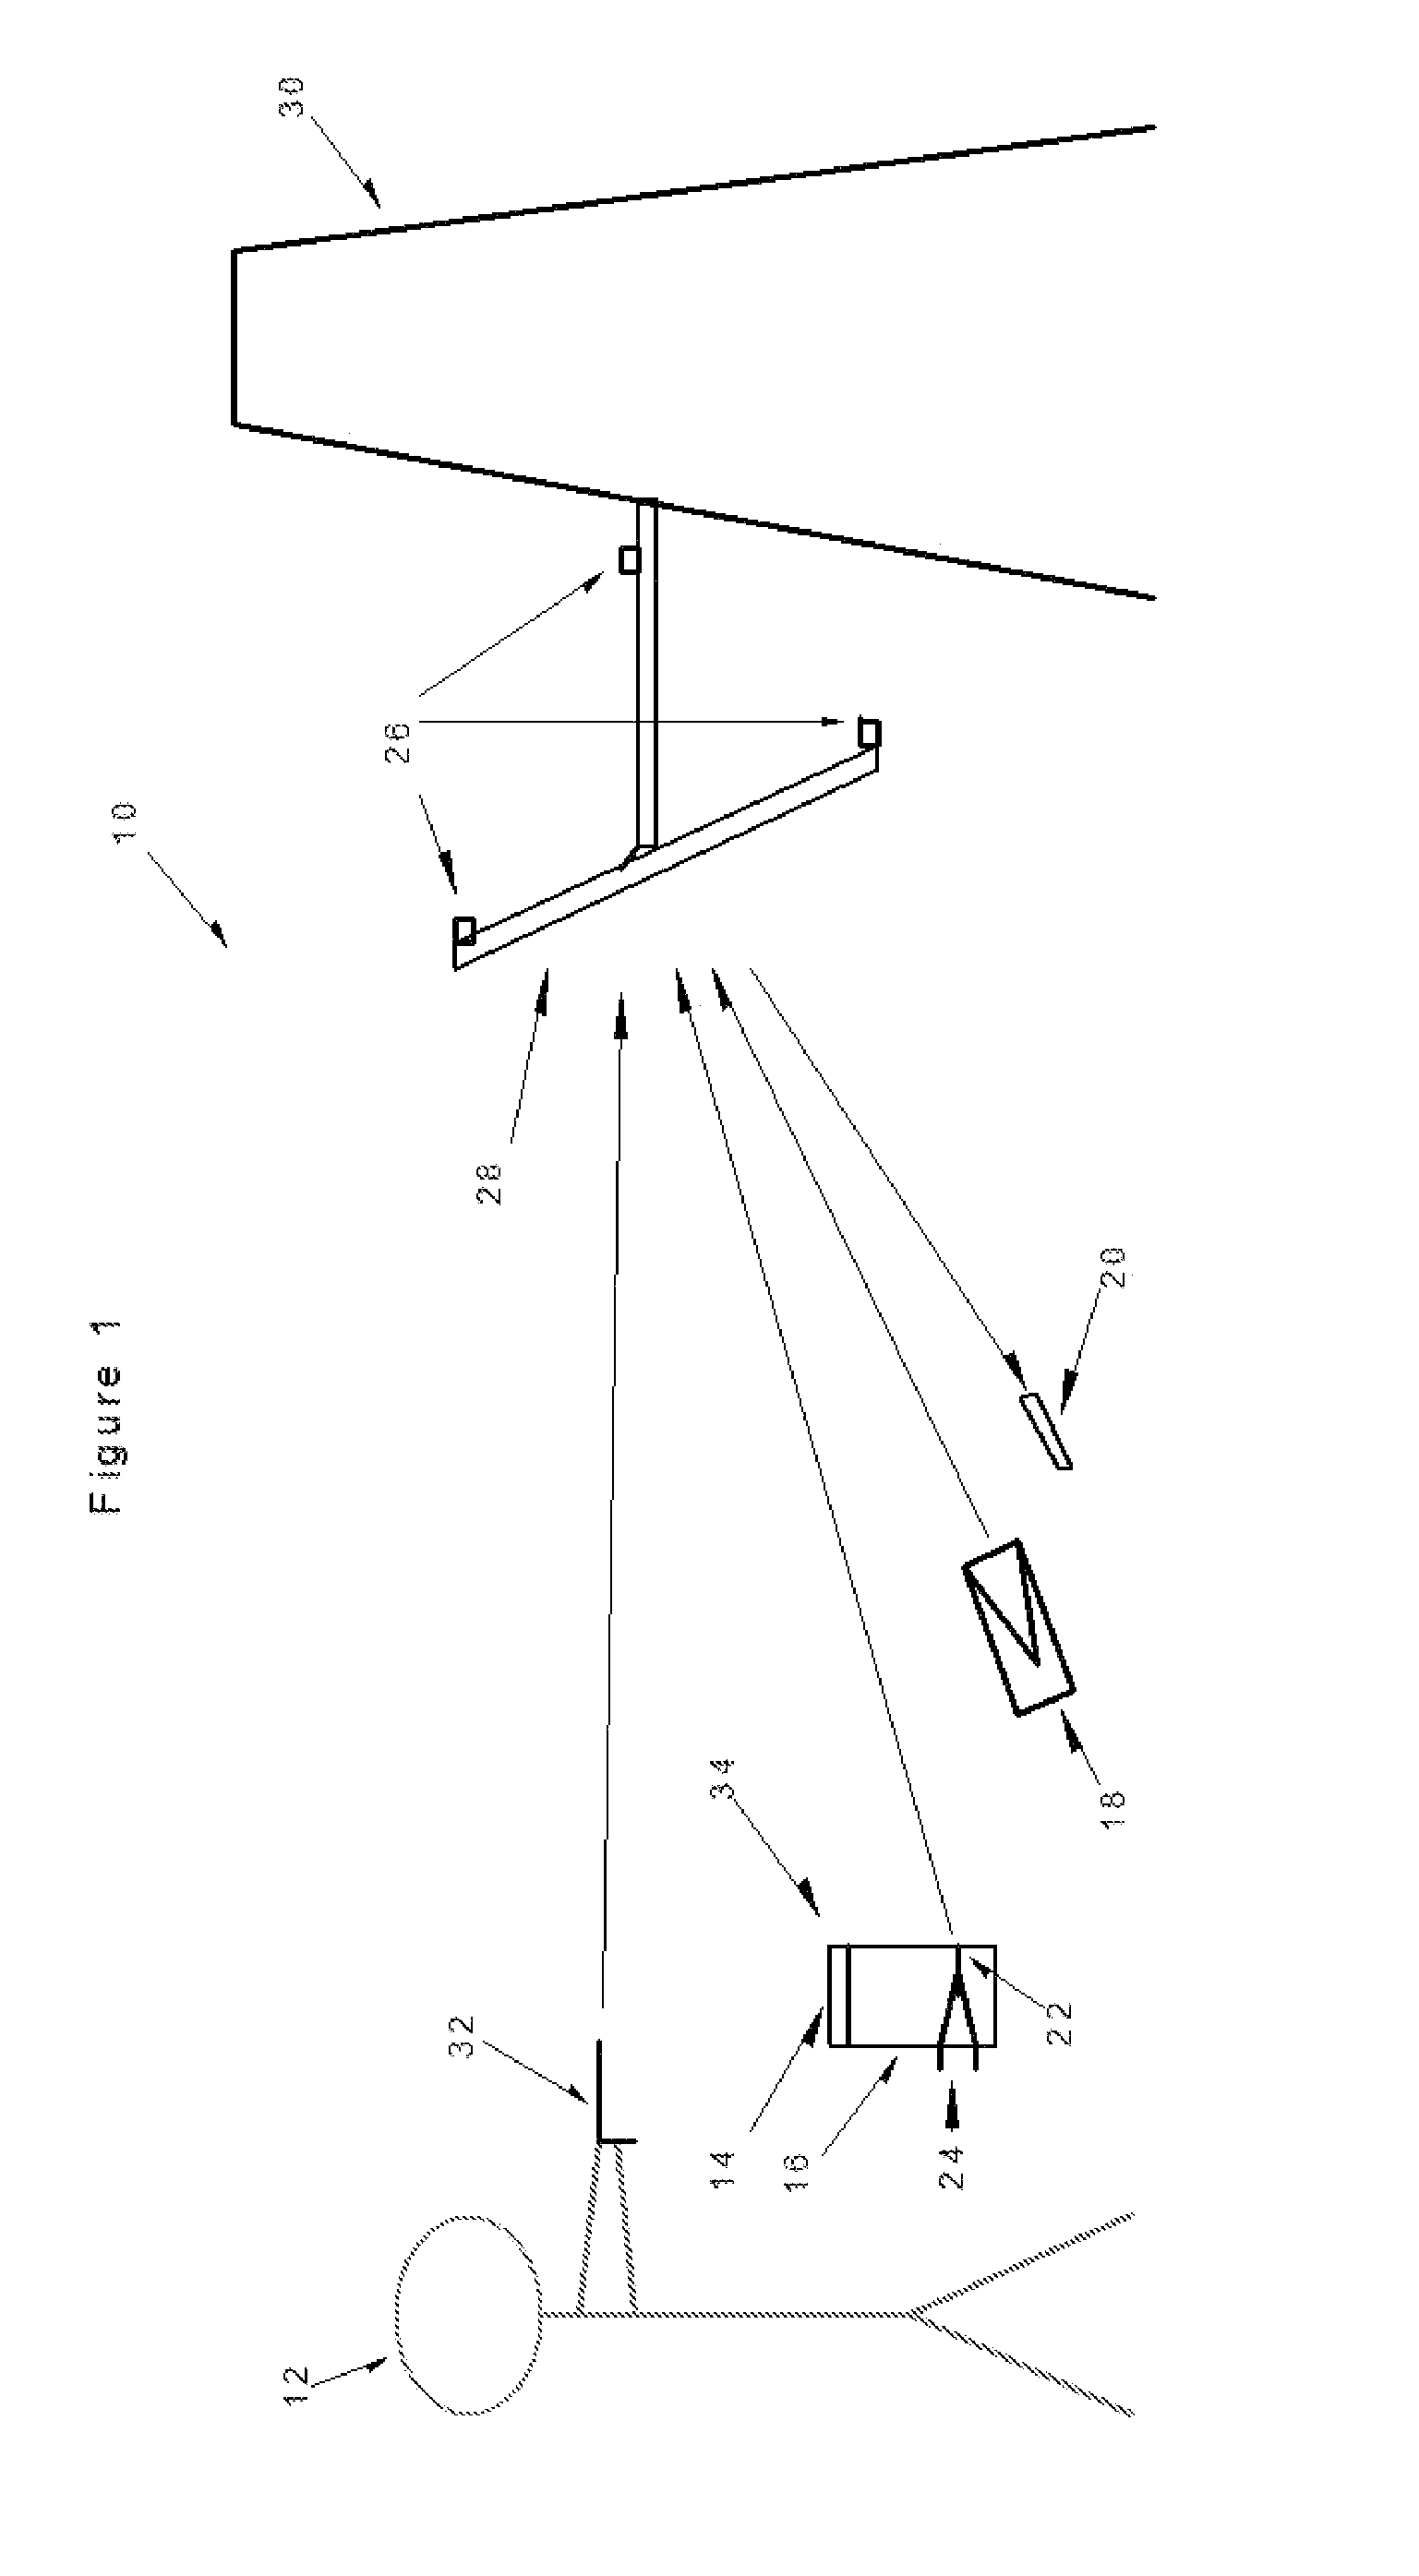 Projectile weapon training apparatus using visual display to determine targeting, accuracy, and/or reaction timing